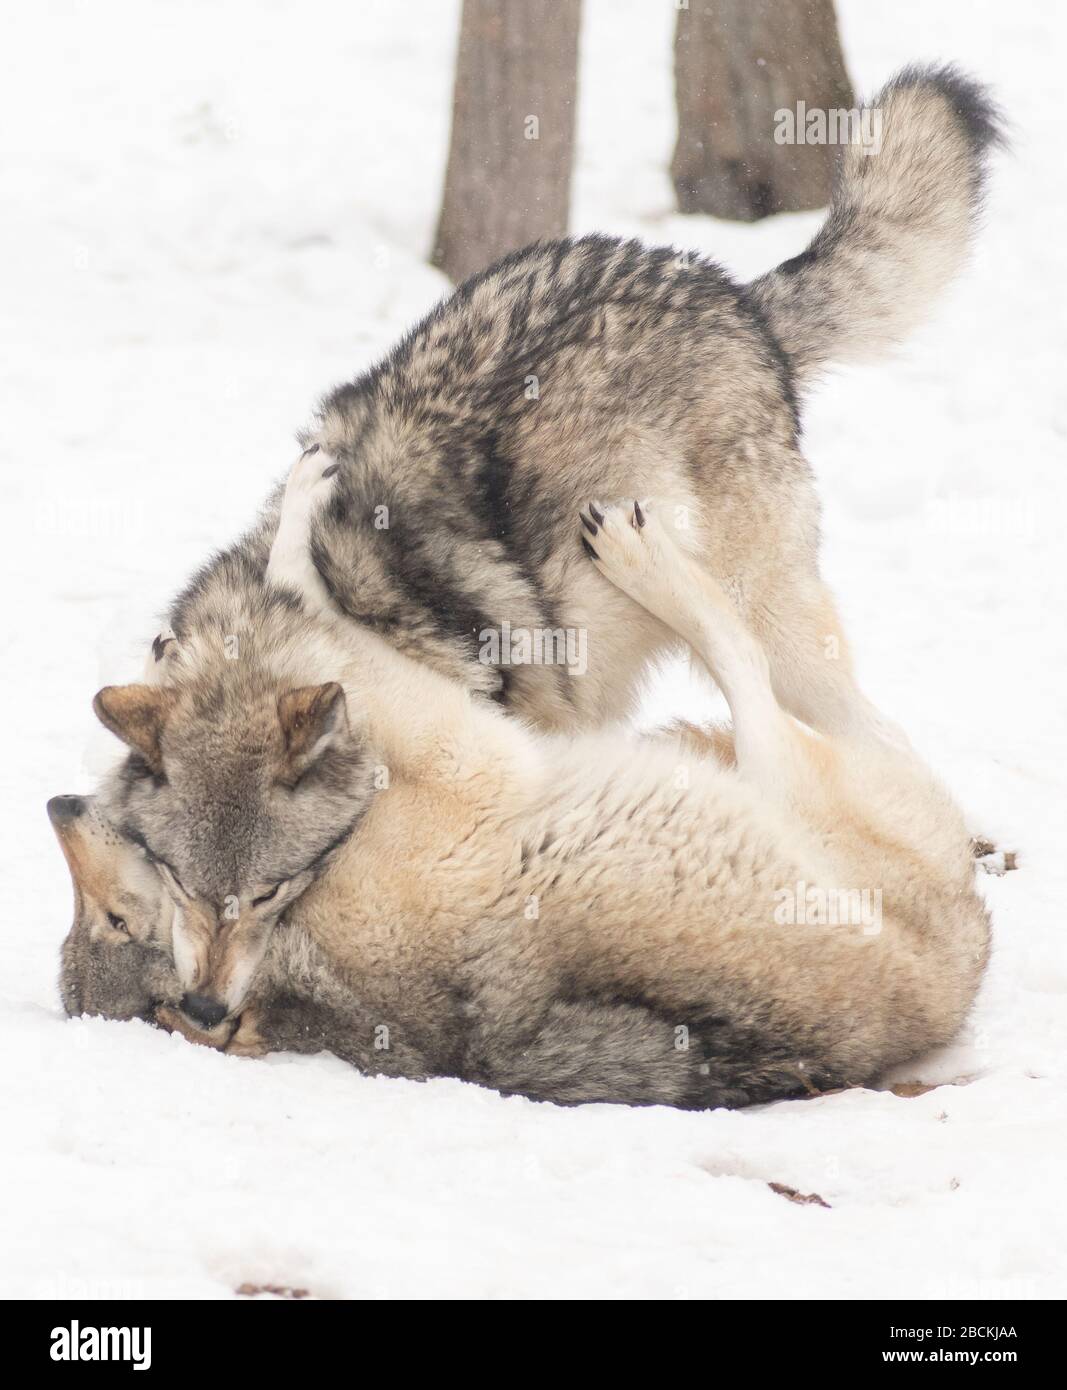 Two big grey wolves playing / fighting with each other in the woods in the winter. One of them is trying to dominate the other. Stock Photo